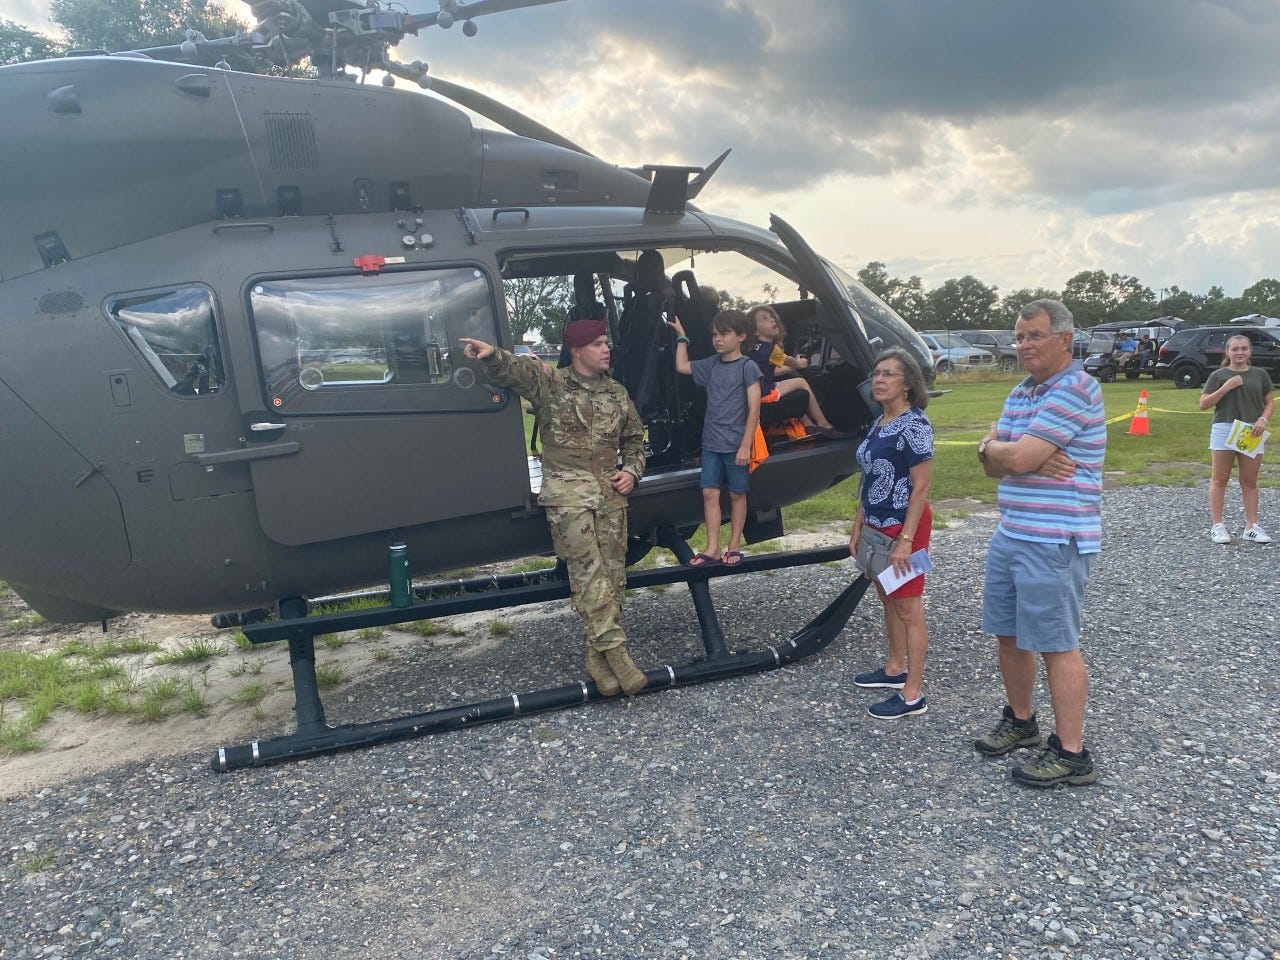 Military personnel were on hand at national night out, and they brought a helicopter with them.